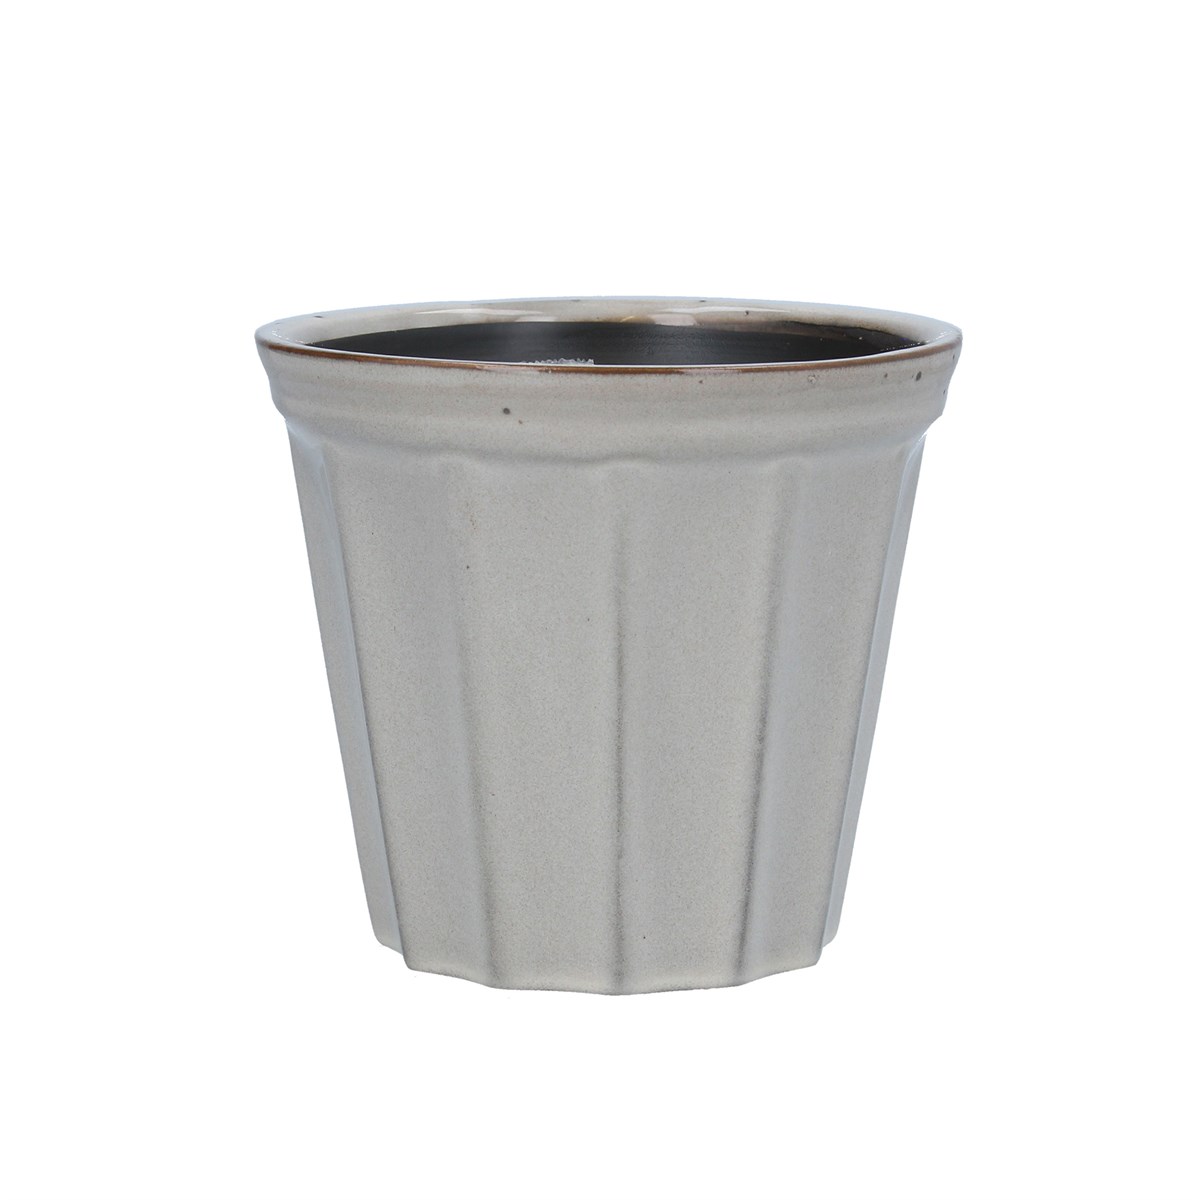 A small taupe ceramic pot cover with all over ribbed design. The perfect addition to your home or the perfect gift for yourself or a loved one. By London designer Gisela Graham.